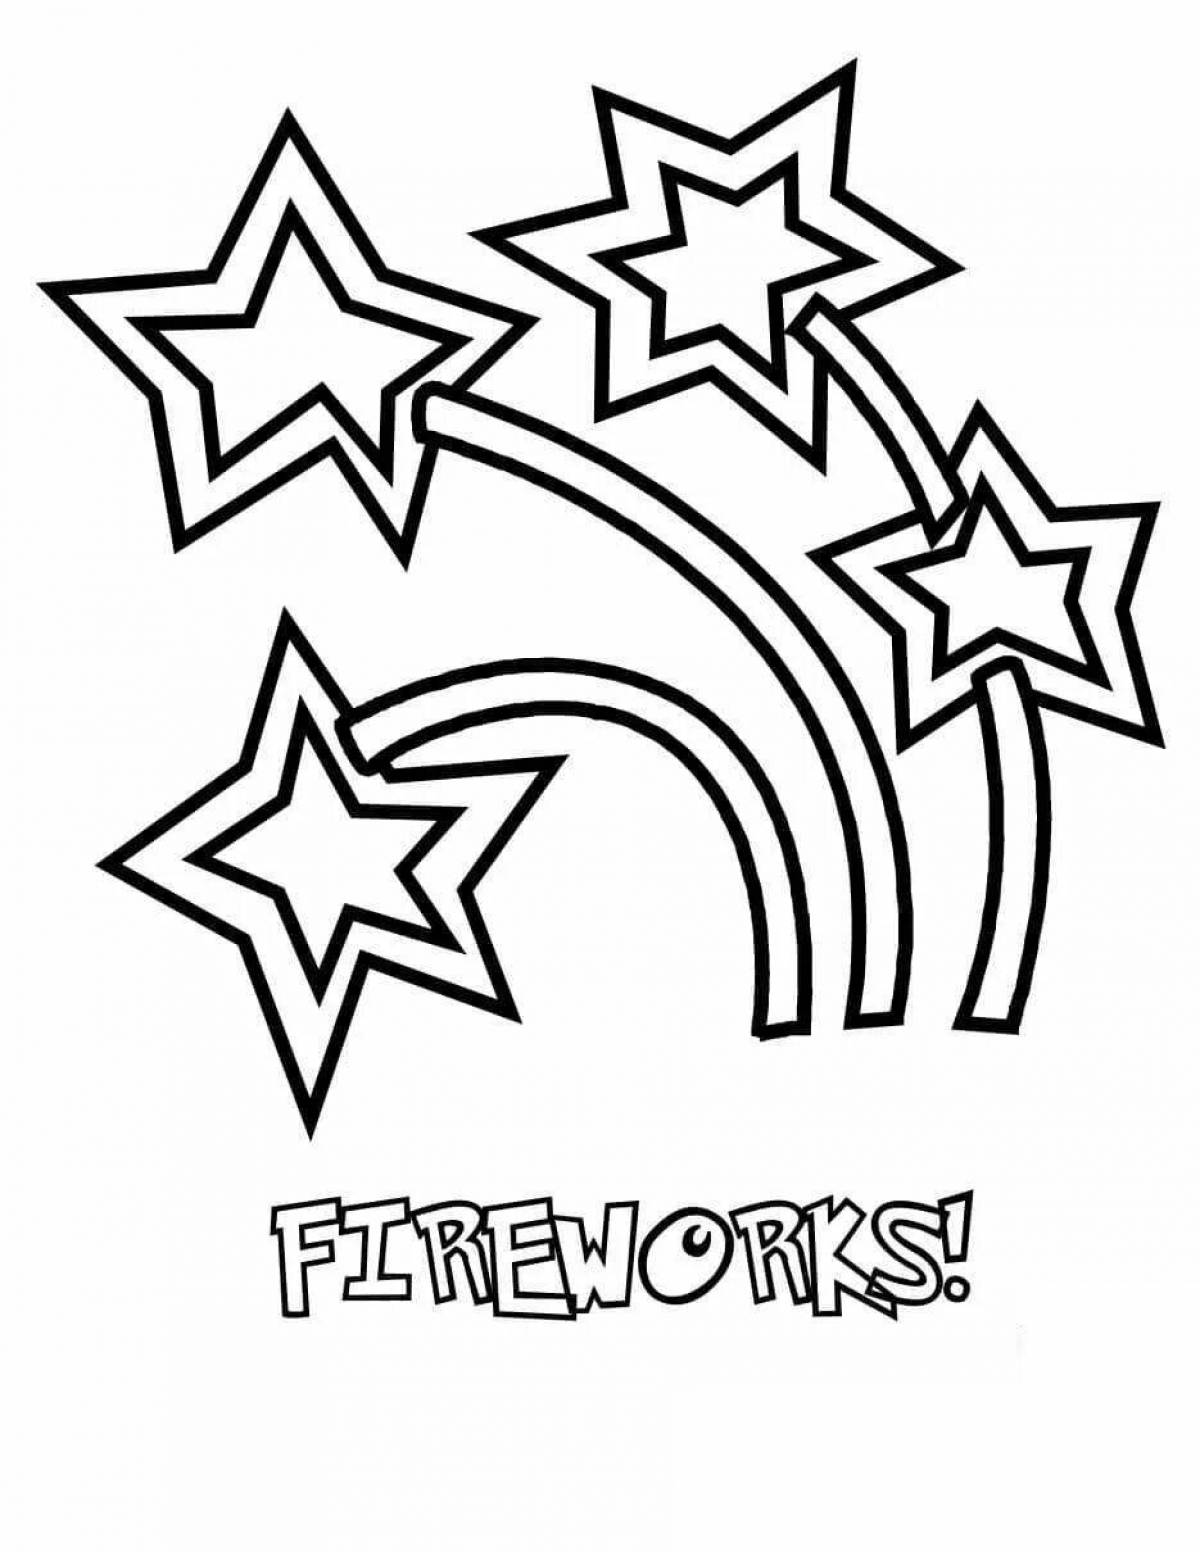 Exciting fireworks coloring book for 3-4 year olds